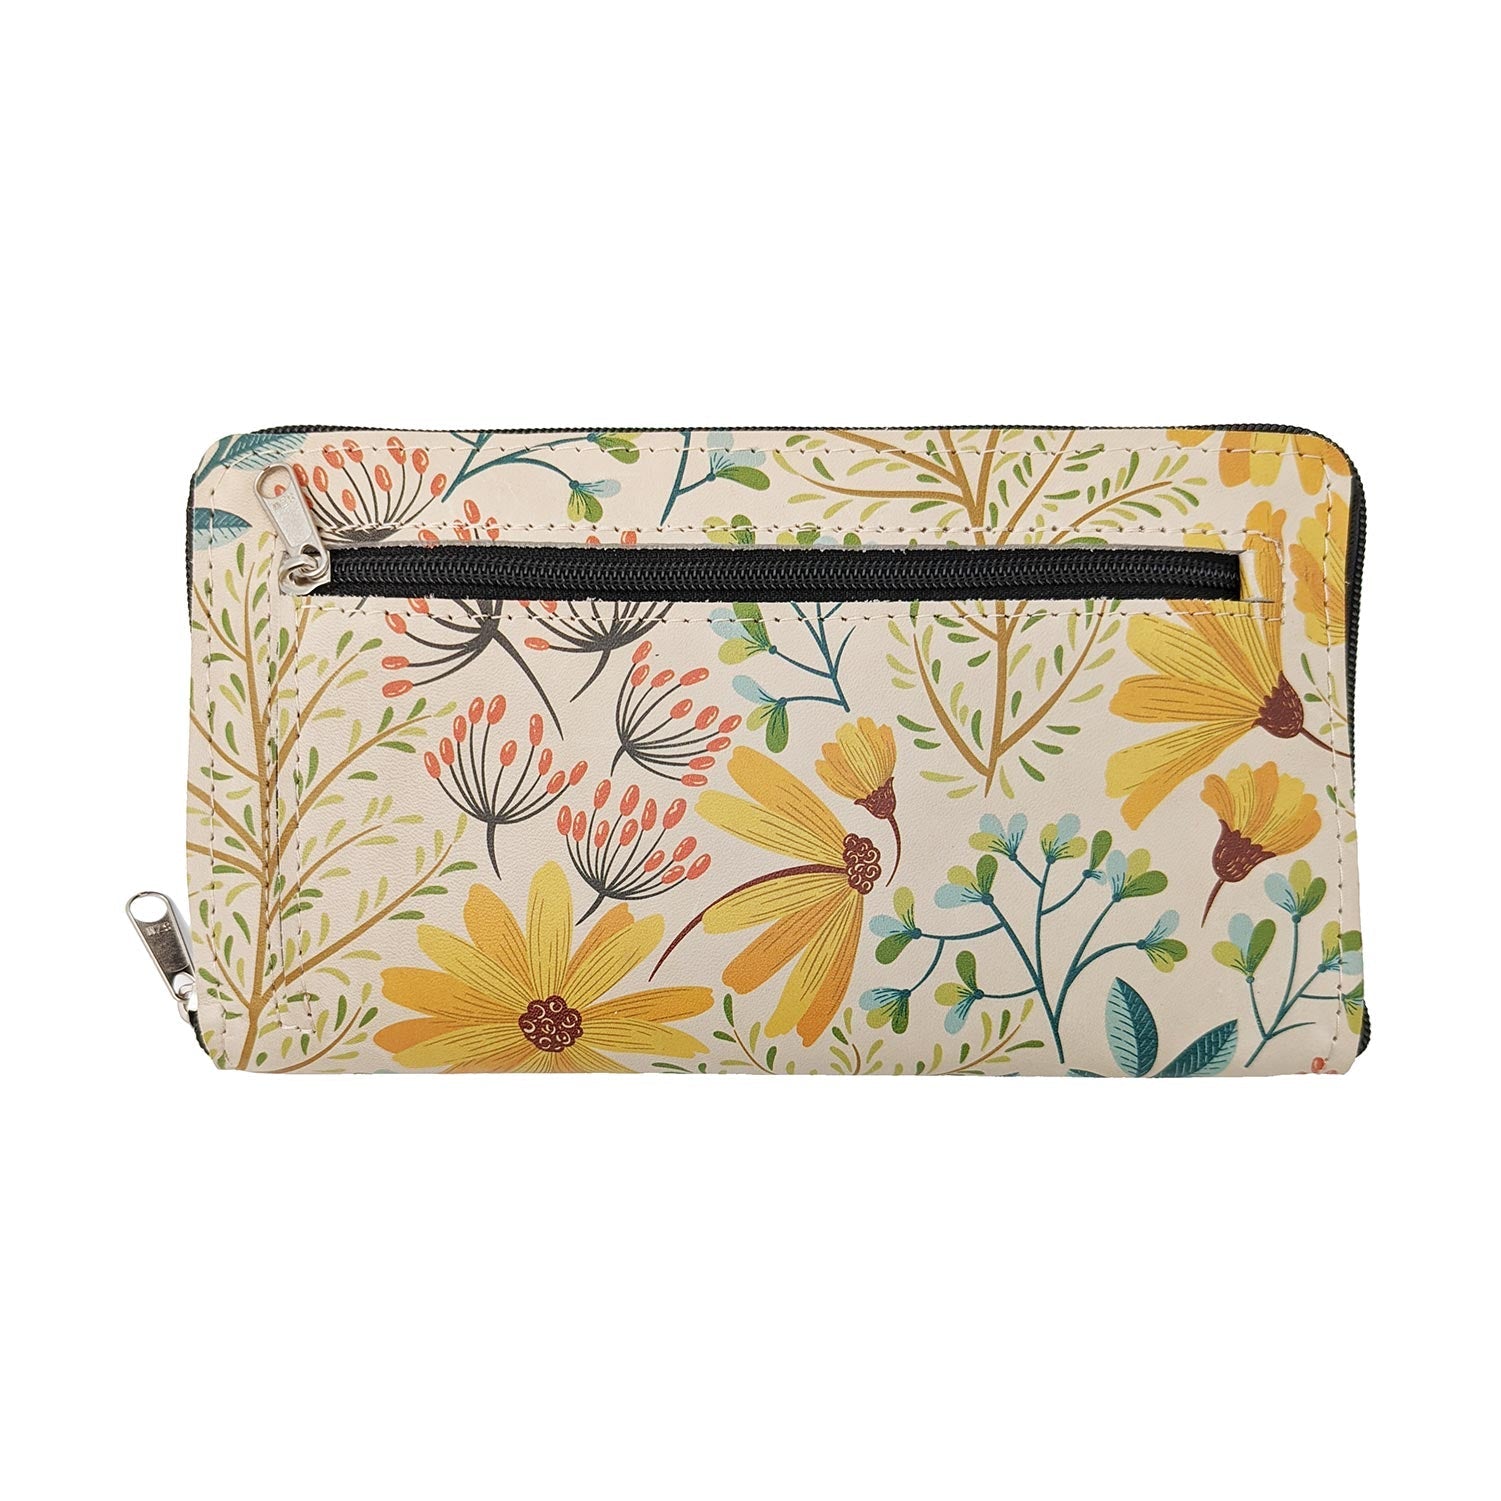 Haritons Urban Ivory Printed Leather Ladies Travel Wallet Wallets Haritons Spring Garden 